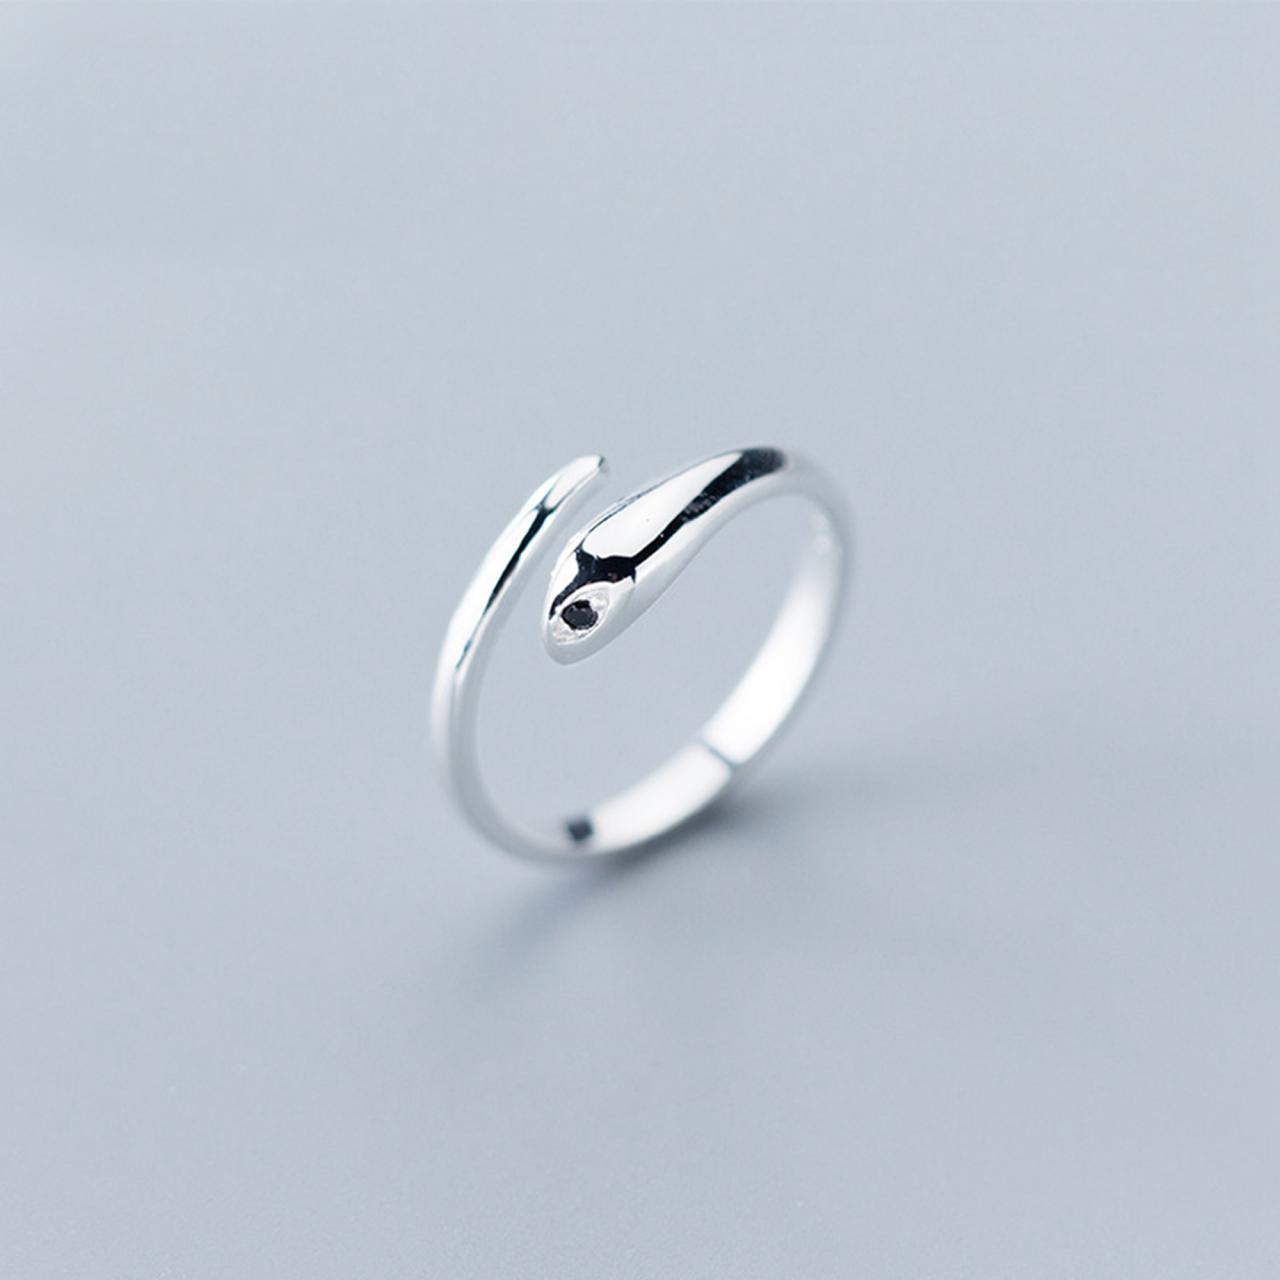 Fashion Simple Snake Ring, Sterling Silver Adjustable Snake Ring, Minimalist Rings, Dainty Ring, Women Snake Ring, Everyday Jewelry